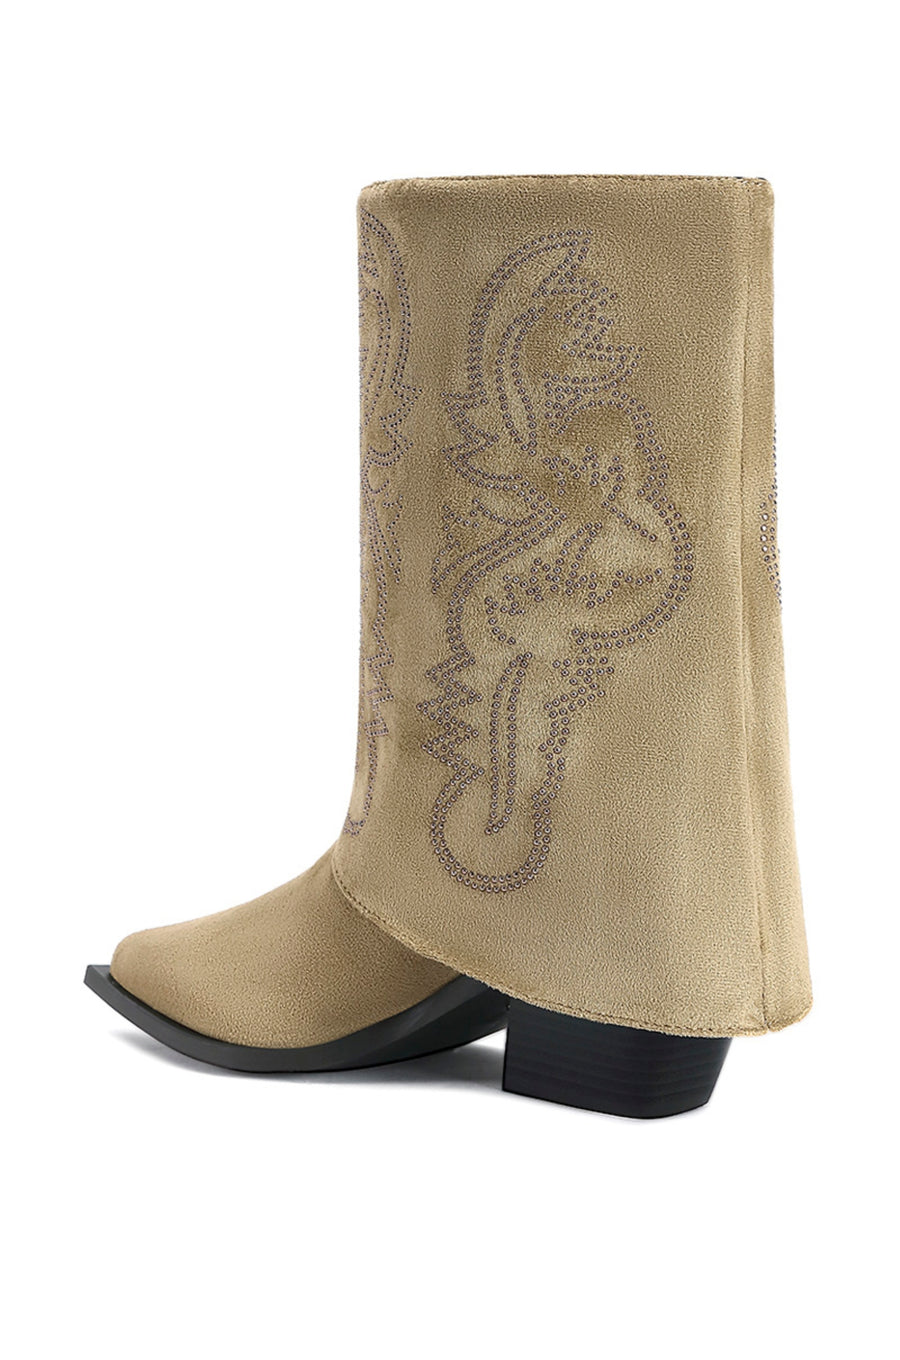 back view of beige suede western inspired cowboy boots with a fold over accent and a classic cowboy boot design on the shaft 